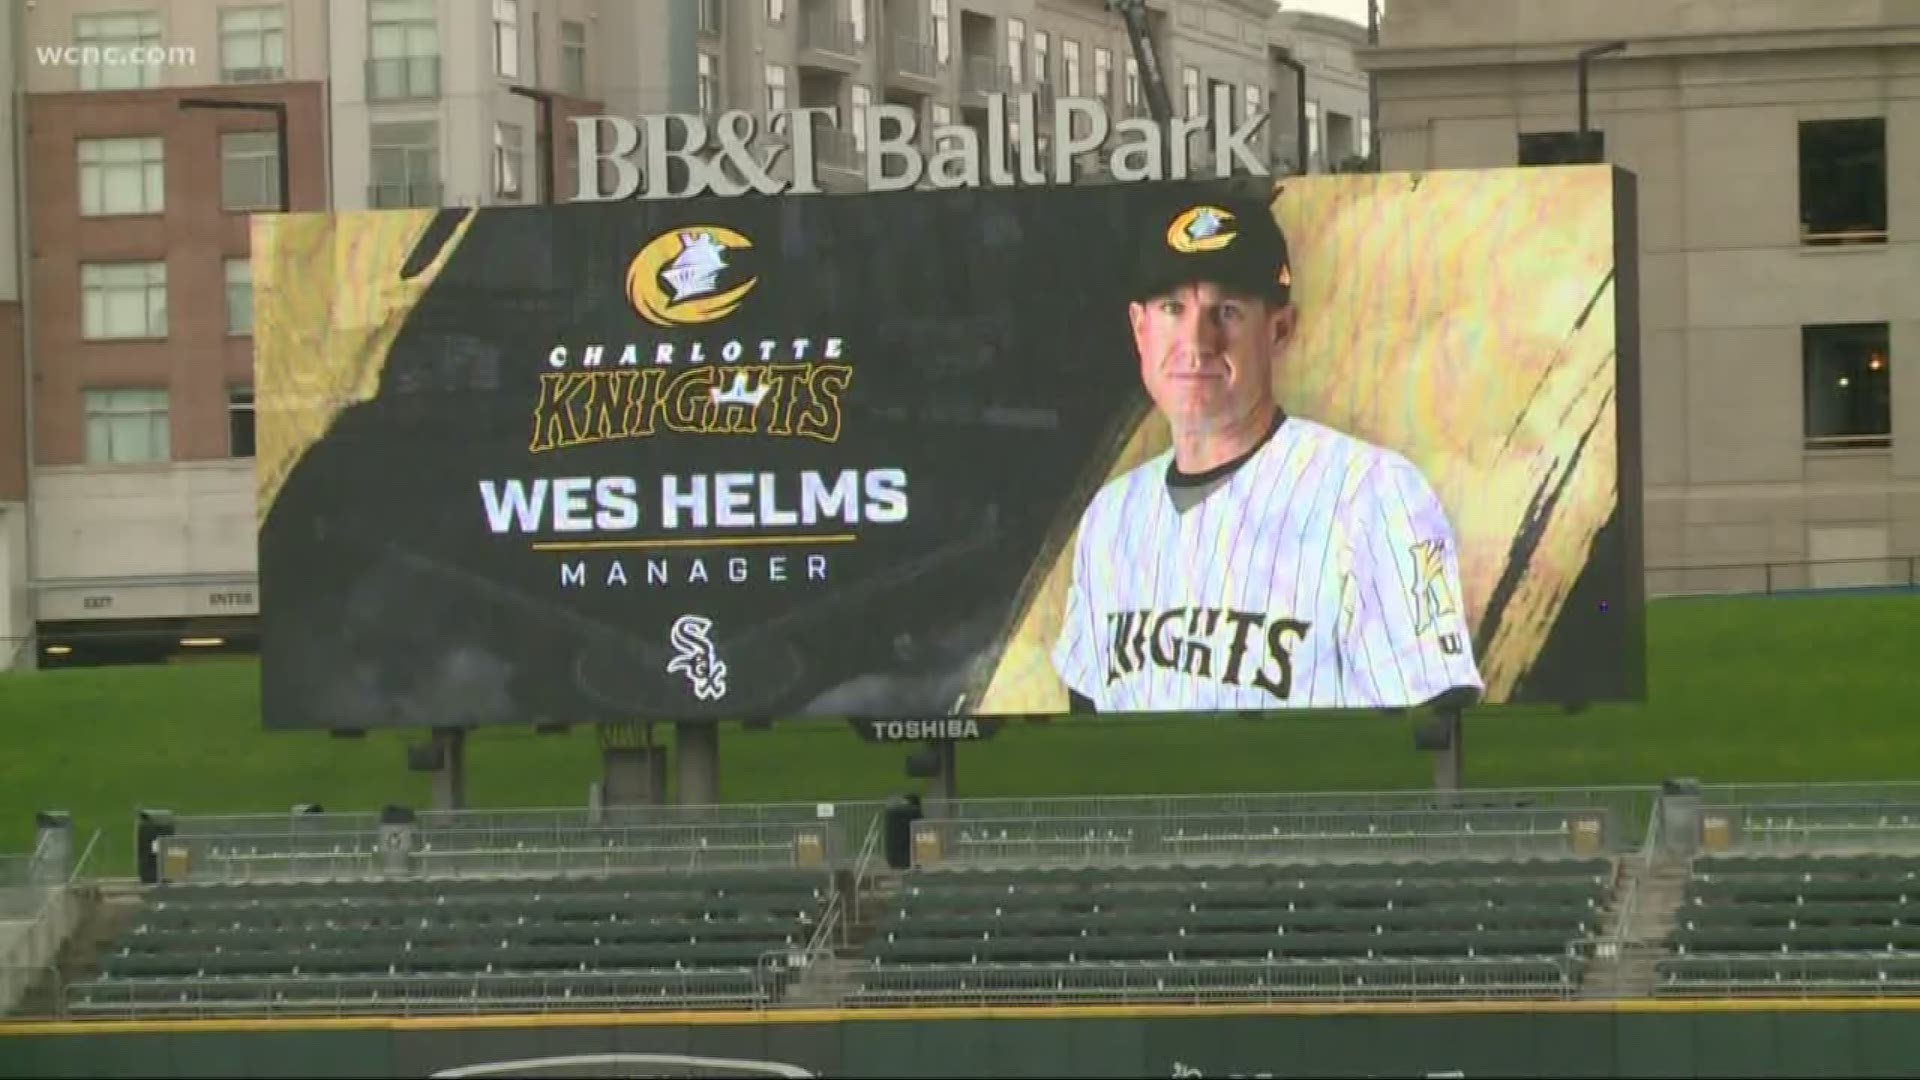 At just 24 years old, Wes Helms left Gastonia to pursue his professional baseball dreams. All these years later he's been named Knights manager.